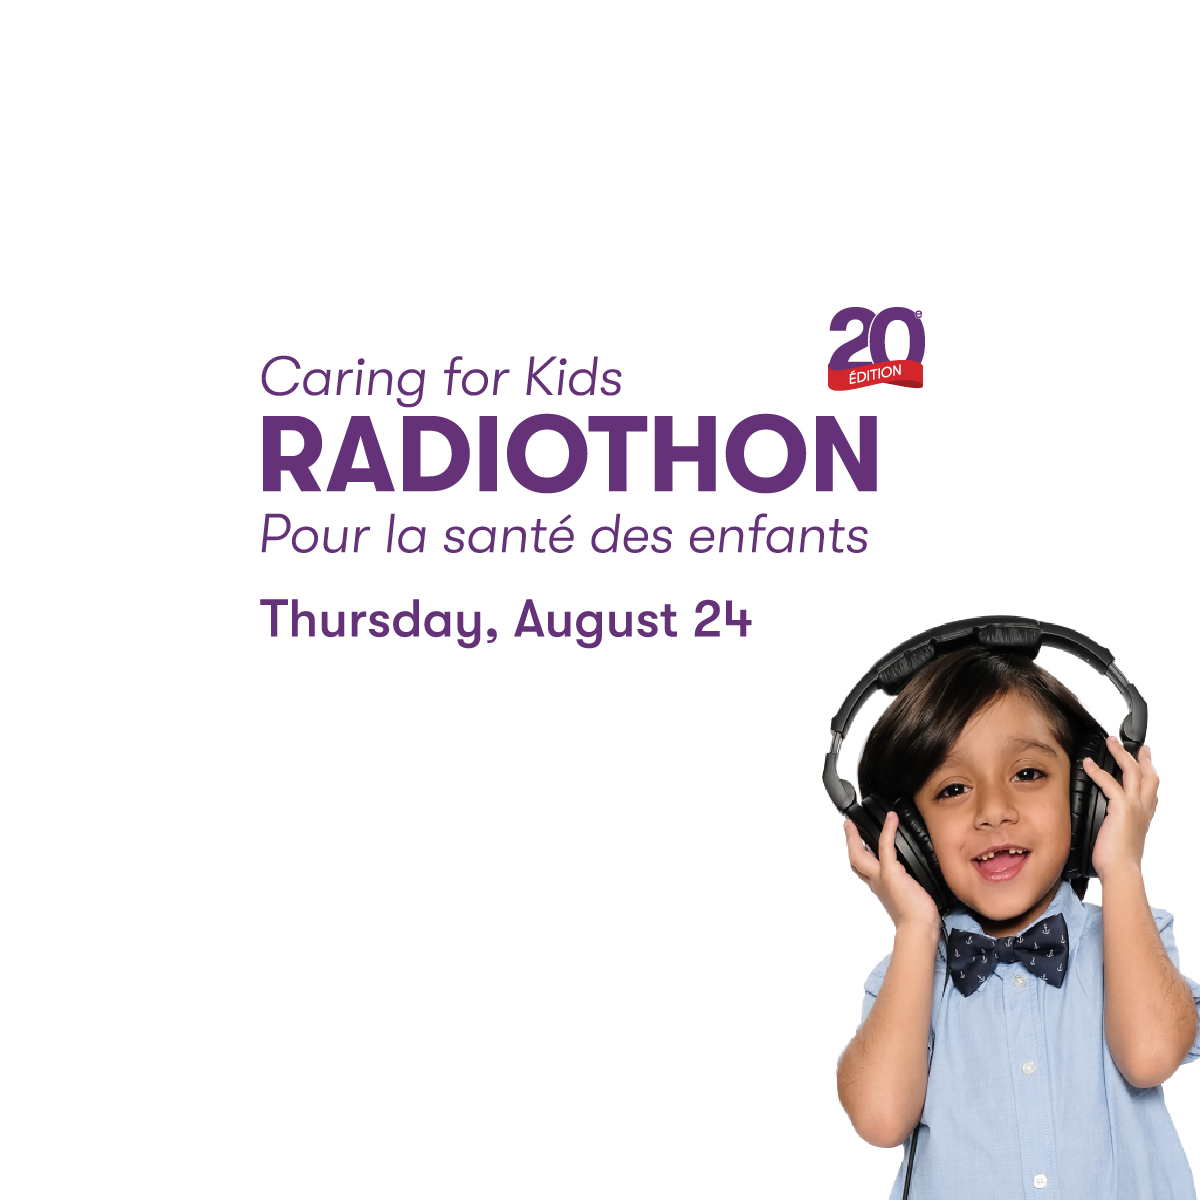 Caring for Kids Radiothon: 5 year old Ibrahim has an incurable rare liver disease